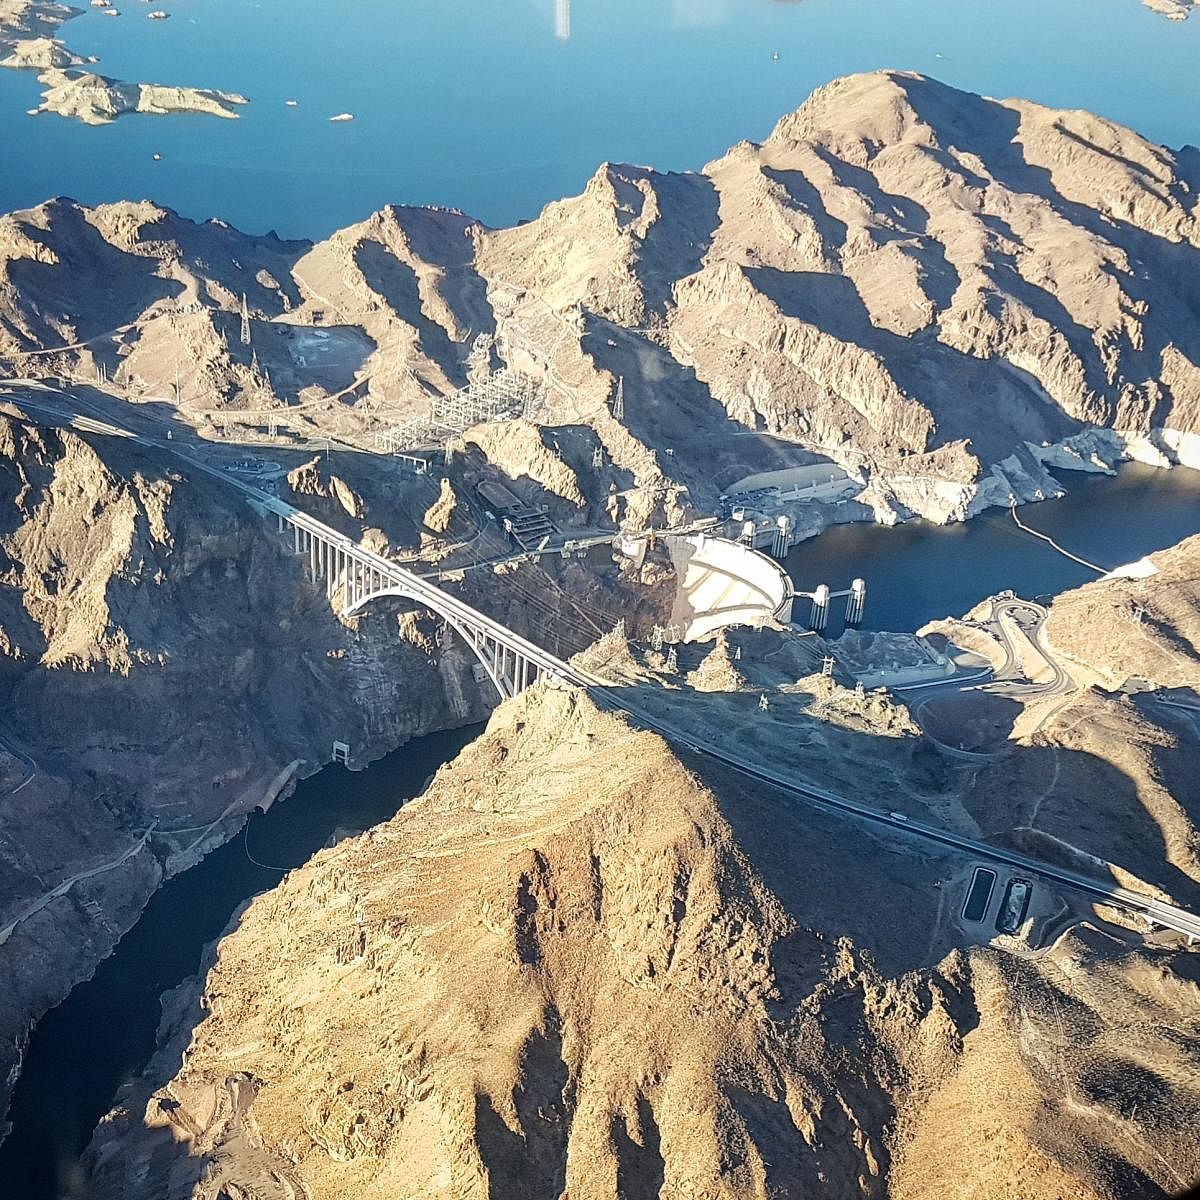 A view of Hoover Dam from the flight to Grand Canyon